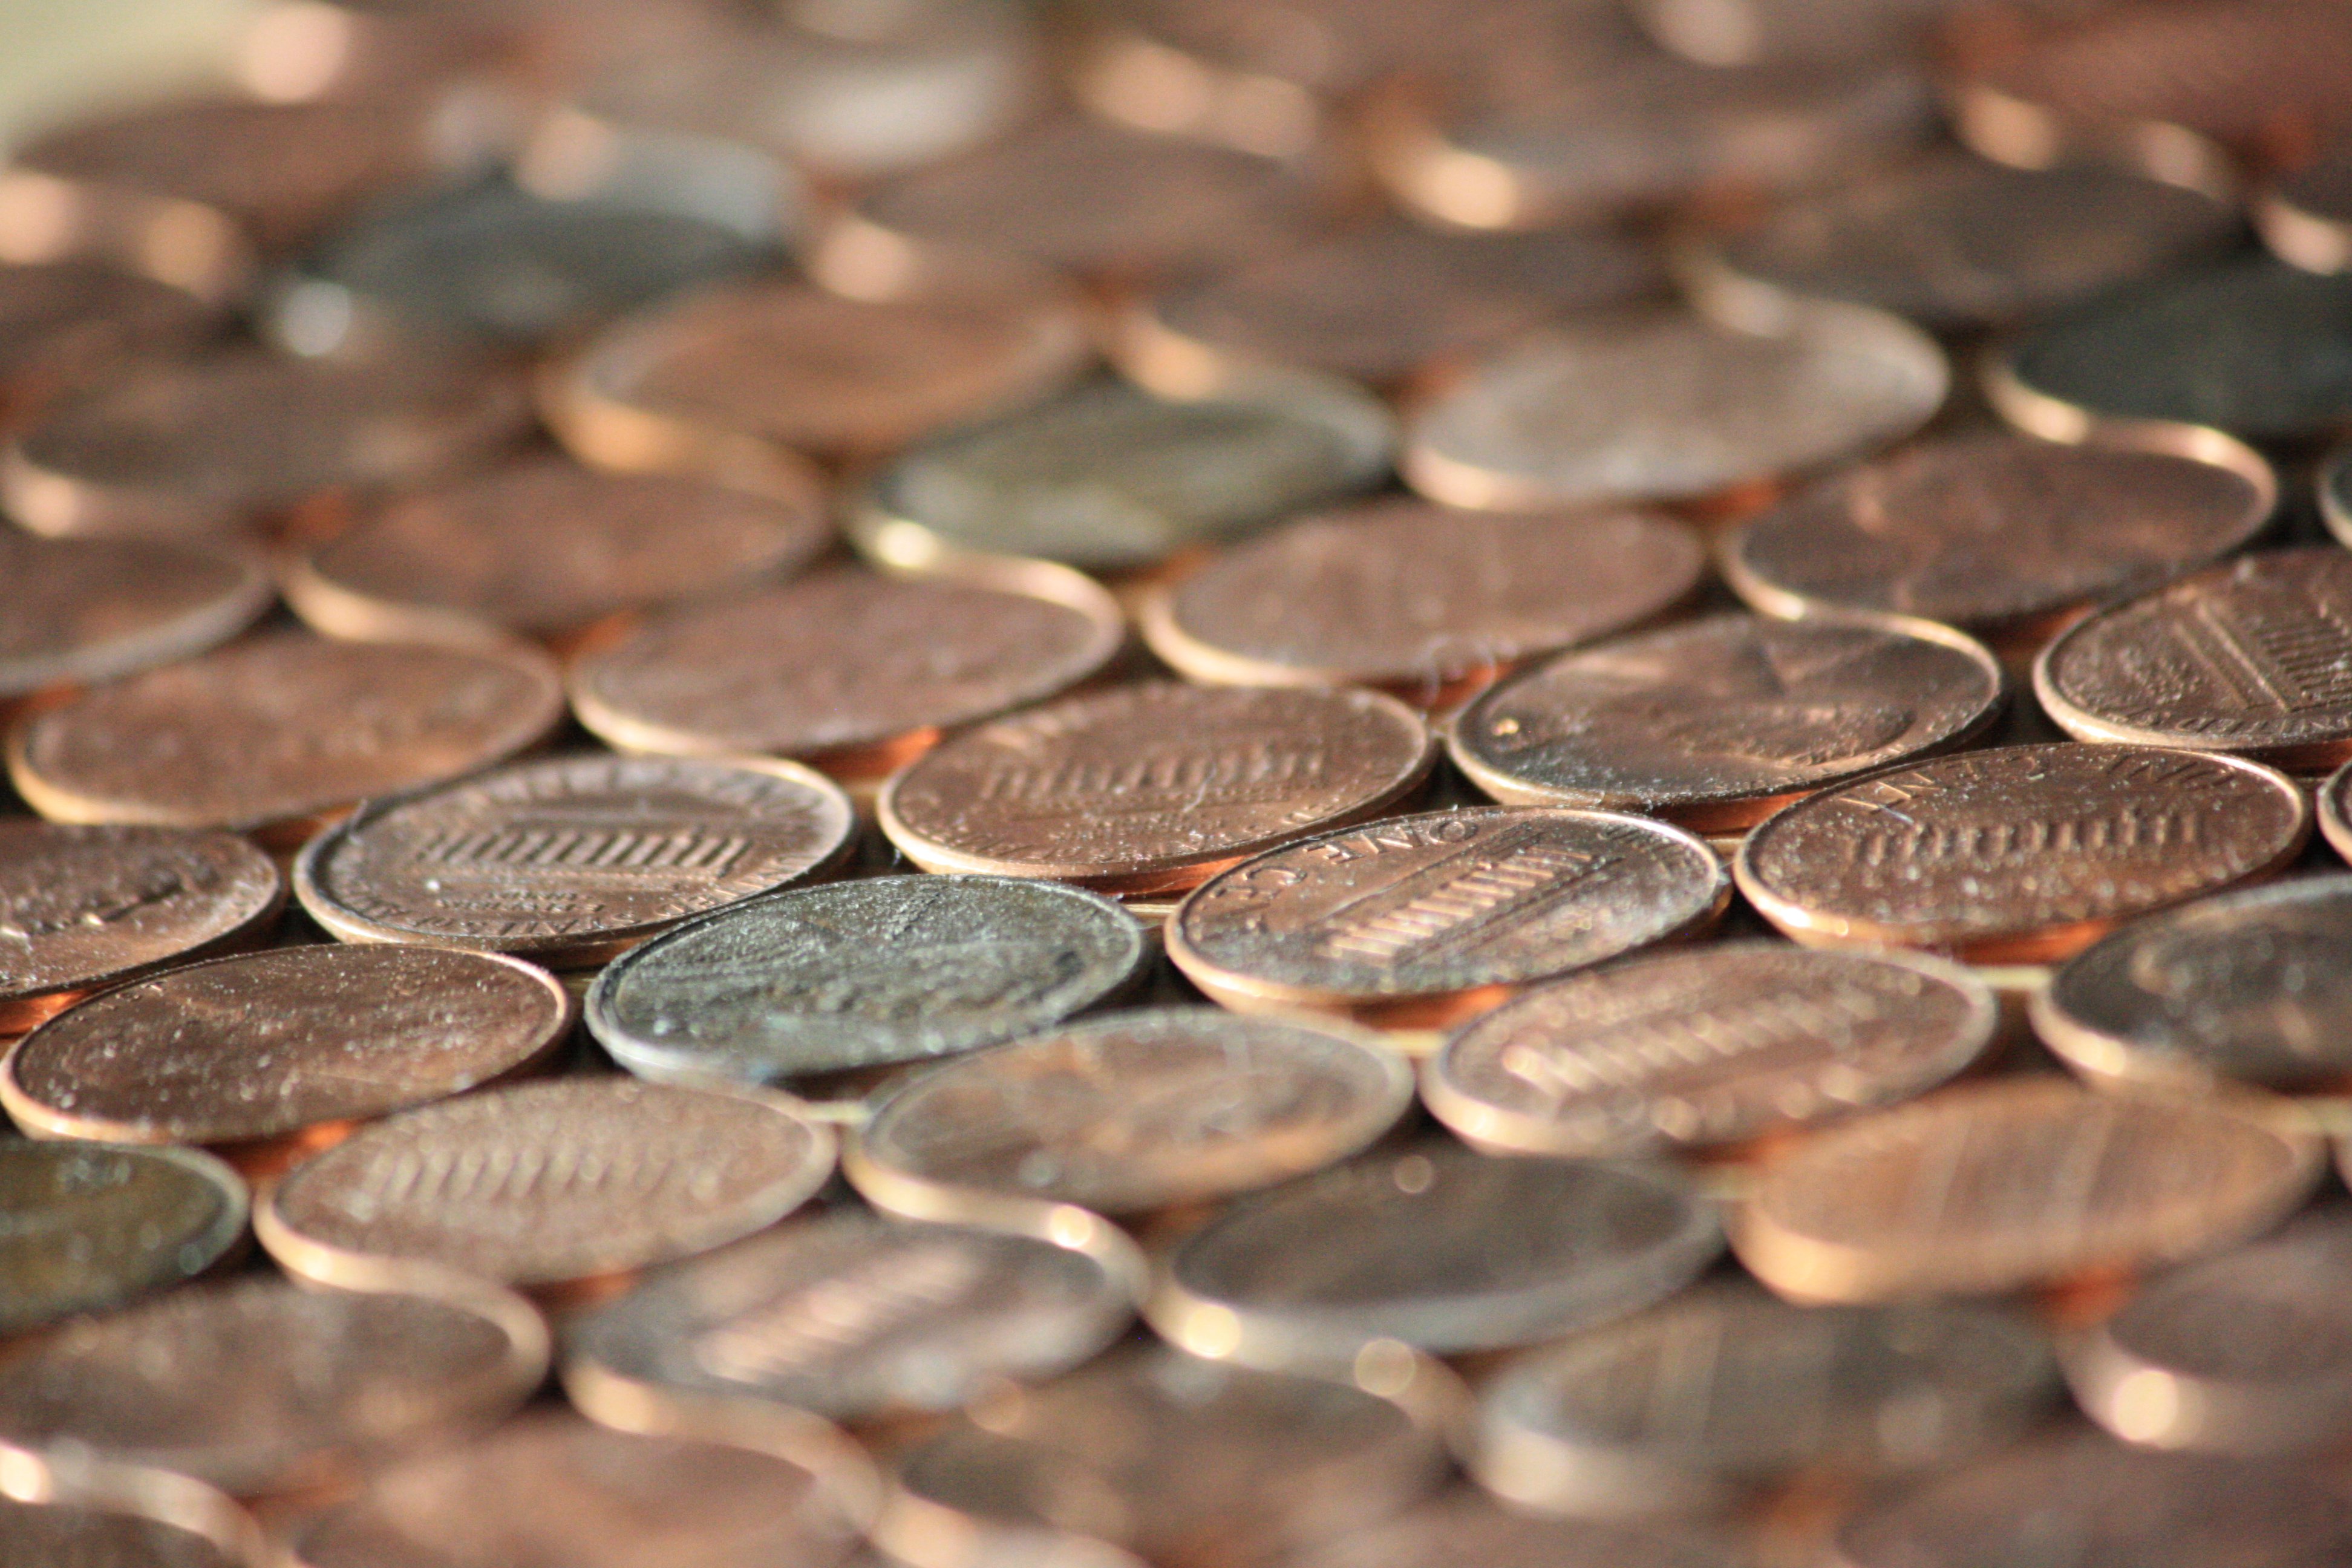 This close up picture shows US Lincoln pennies some heads and some tails. 